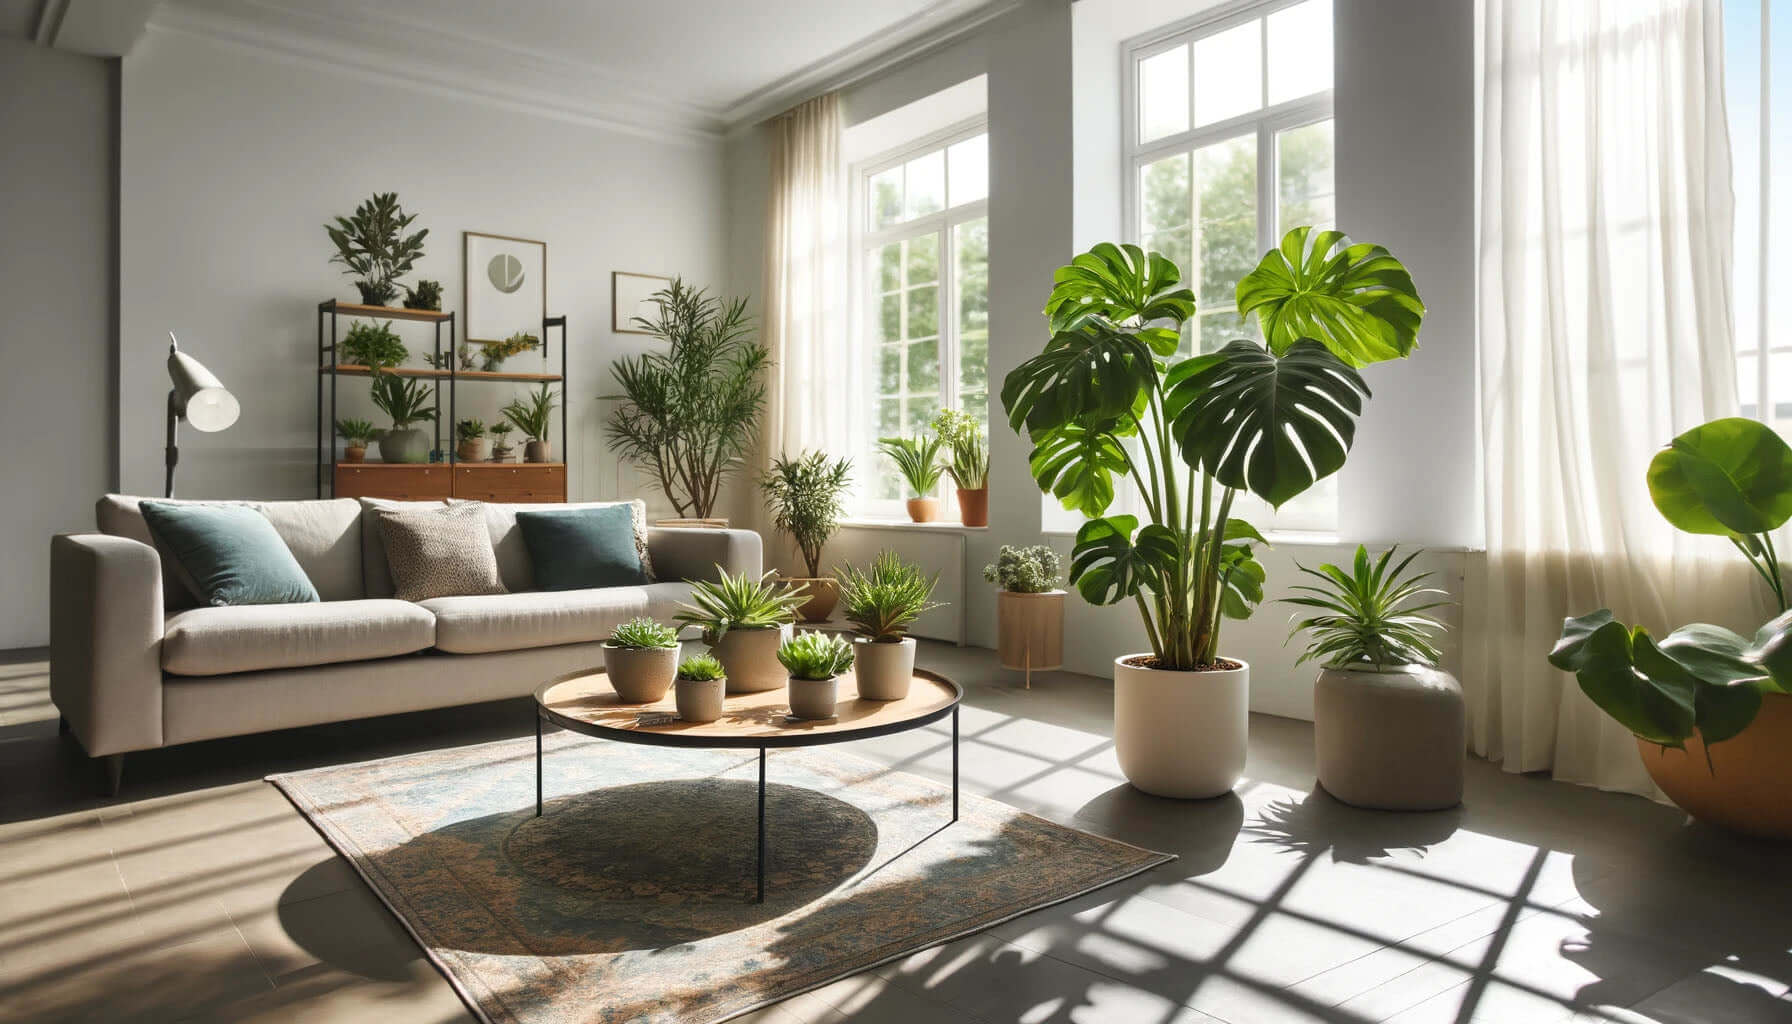 Sunlit living room with a variety of house plants, including a large Monstera, enhancing a peaceful home decor